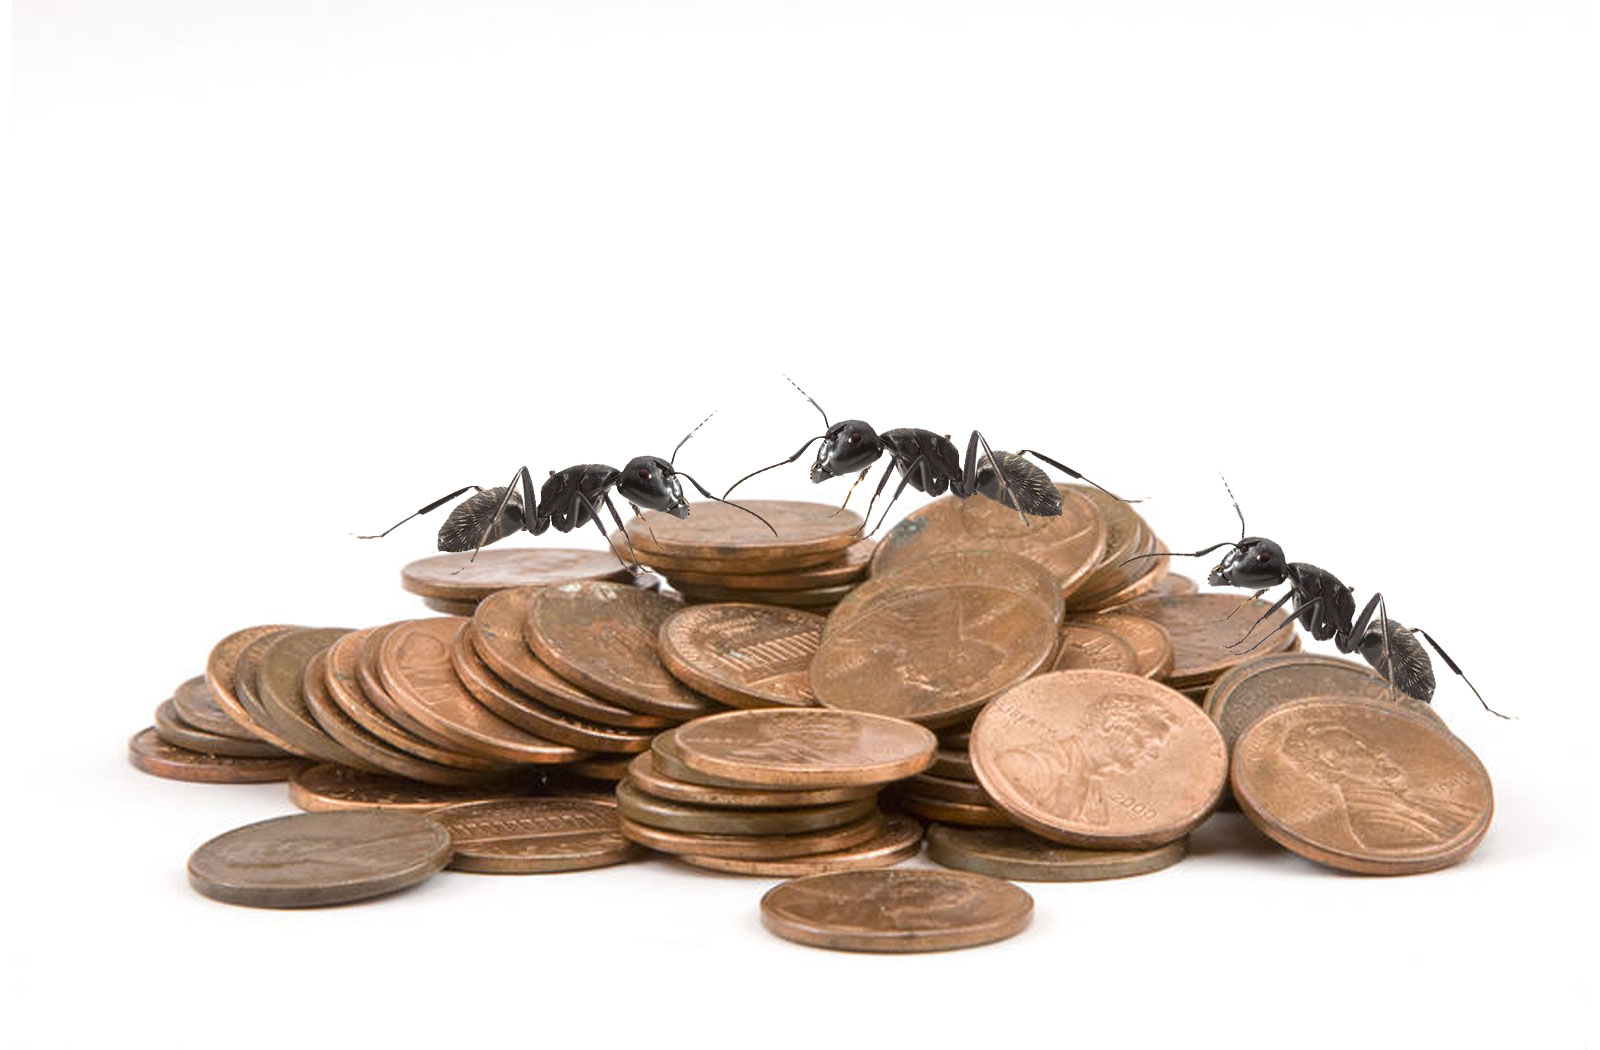 Pest control services to remove ants